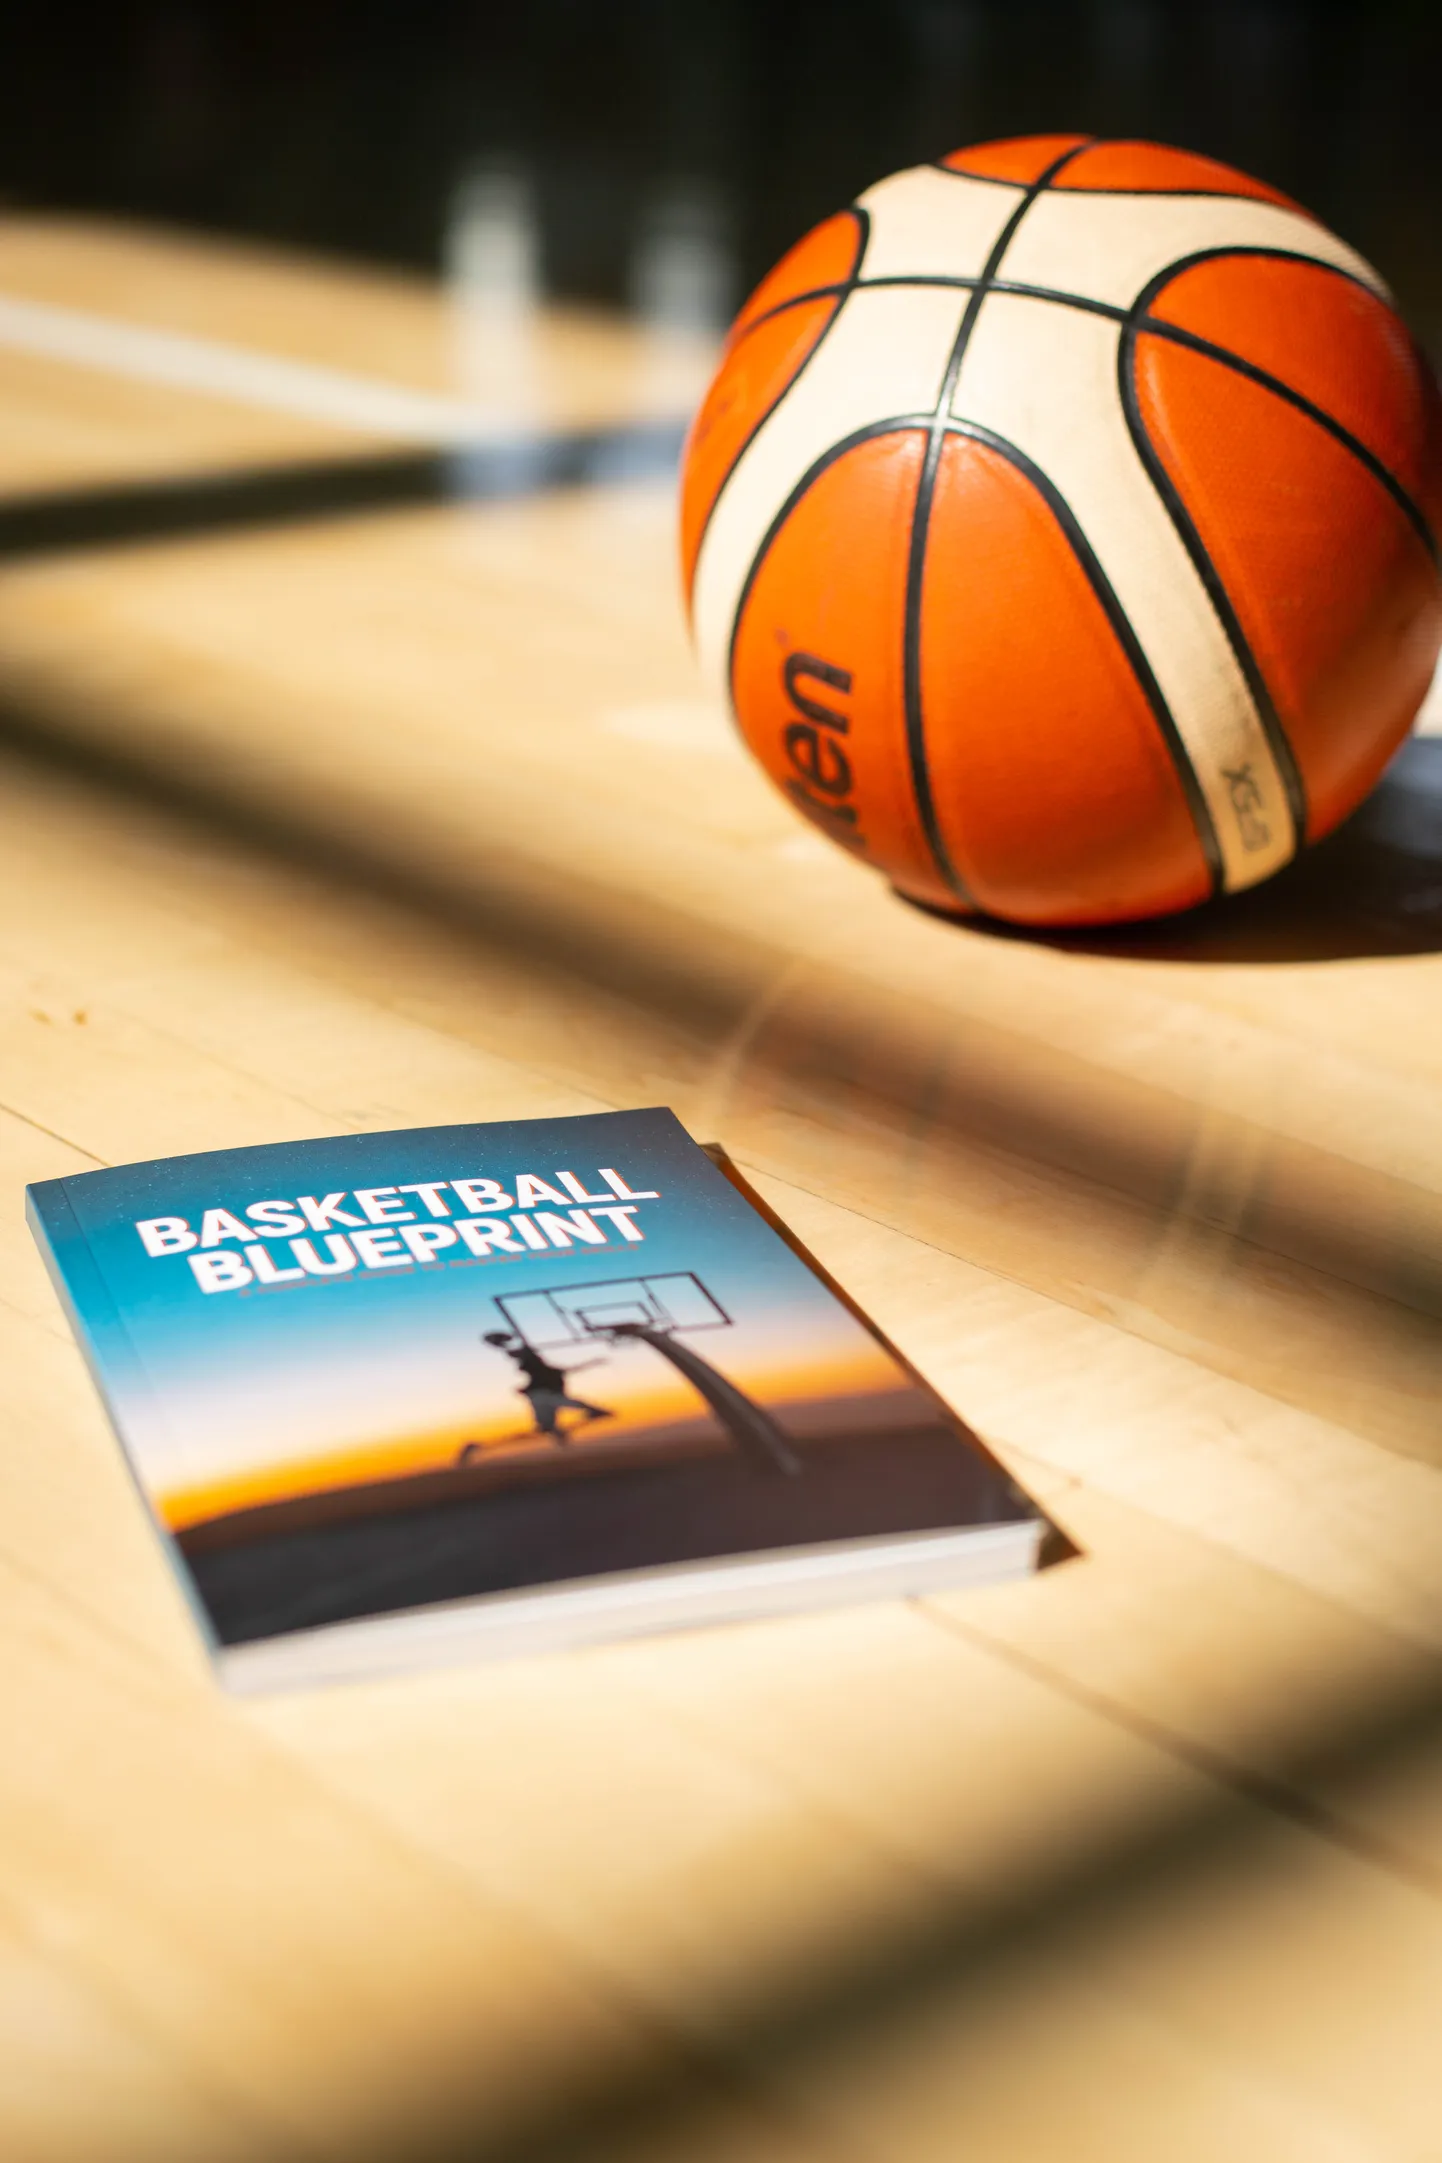 Grāmata "Basketball Blueprint: A Complete Guide to Master Your Skills".